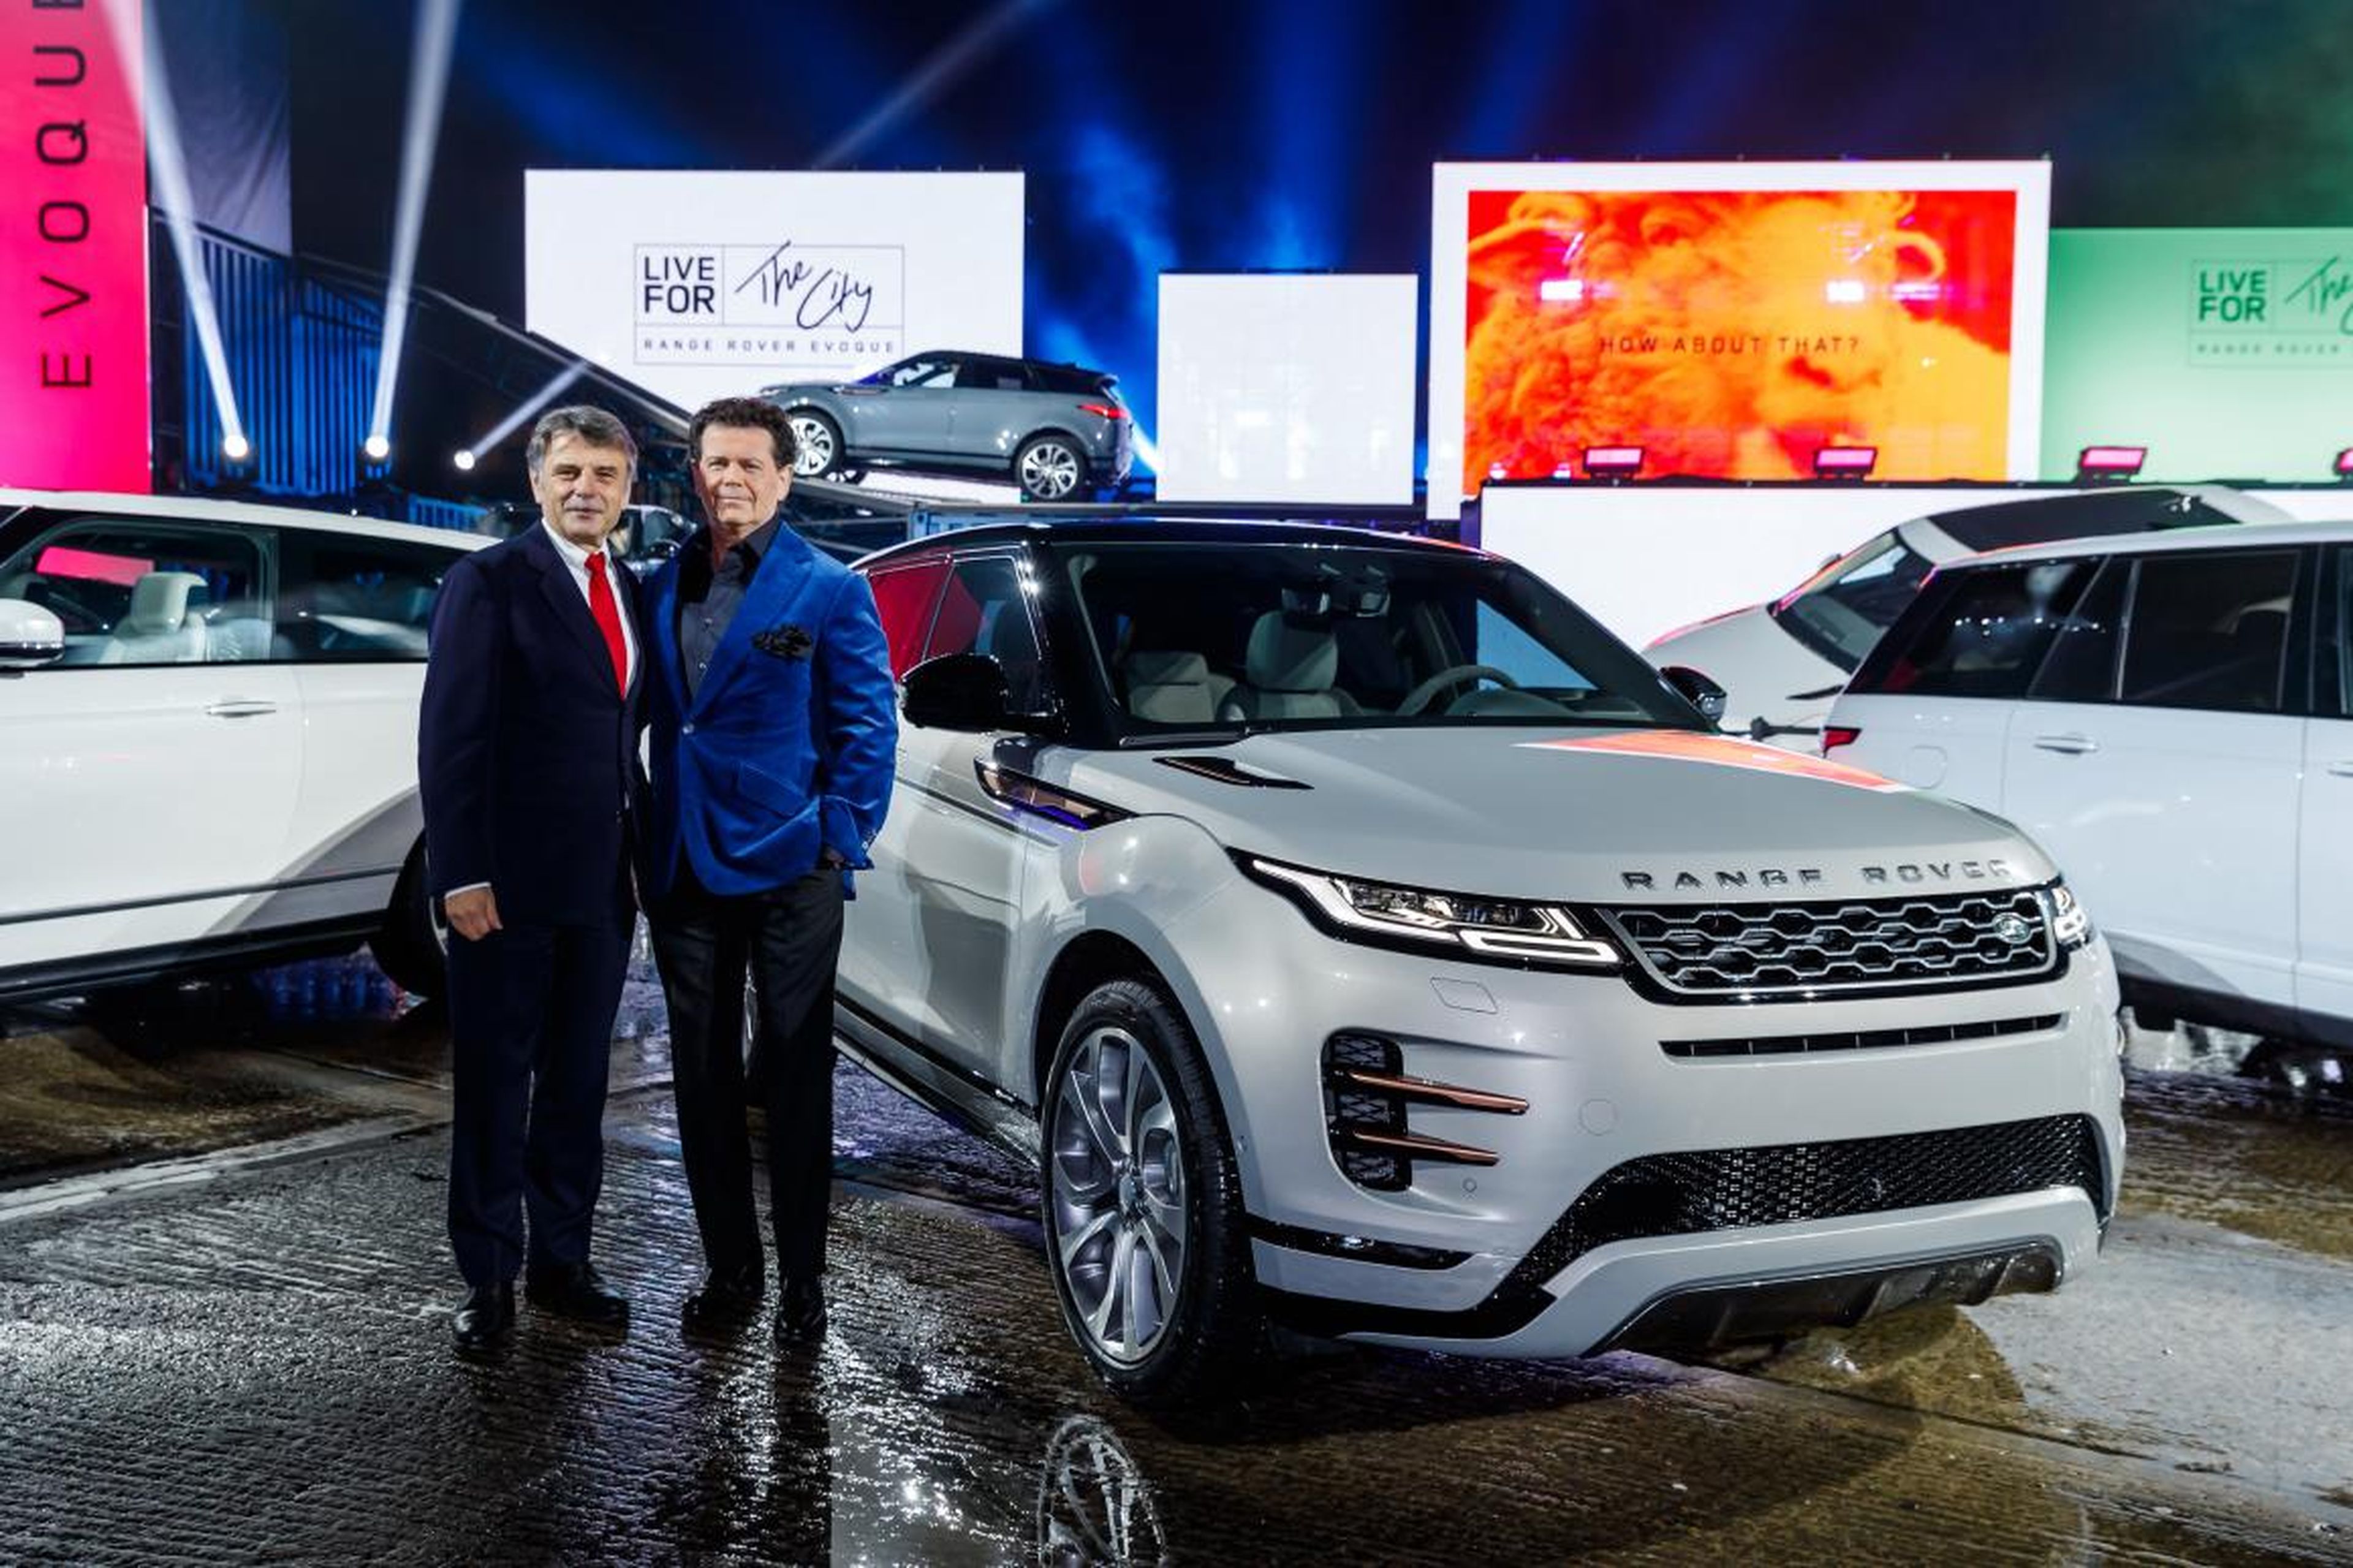 If Elon Musk has an equal for automotive showmanship, it's Land Rover design head Gerry McGovern. He welcomed the scorn for the brand's Evoque SUV, which has gone on to be a top-seller, despite its initially polarizing styling.